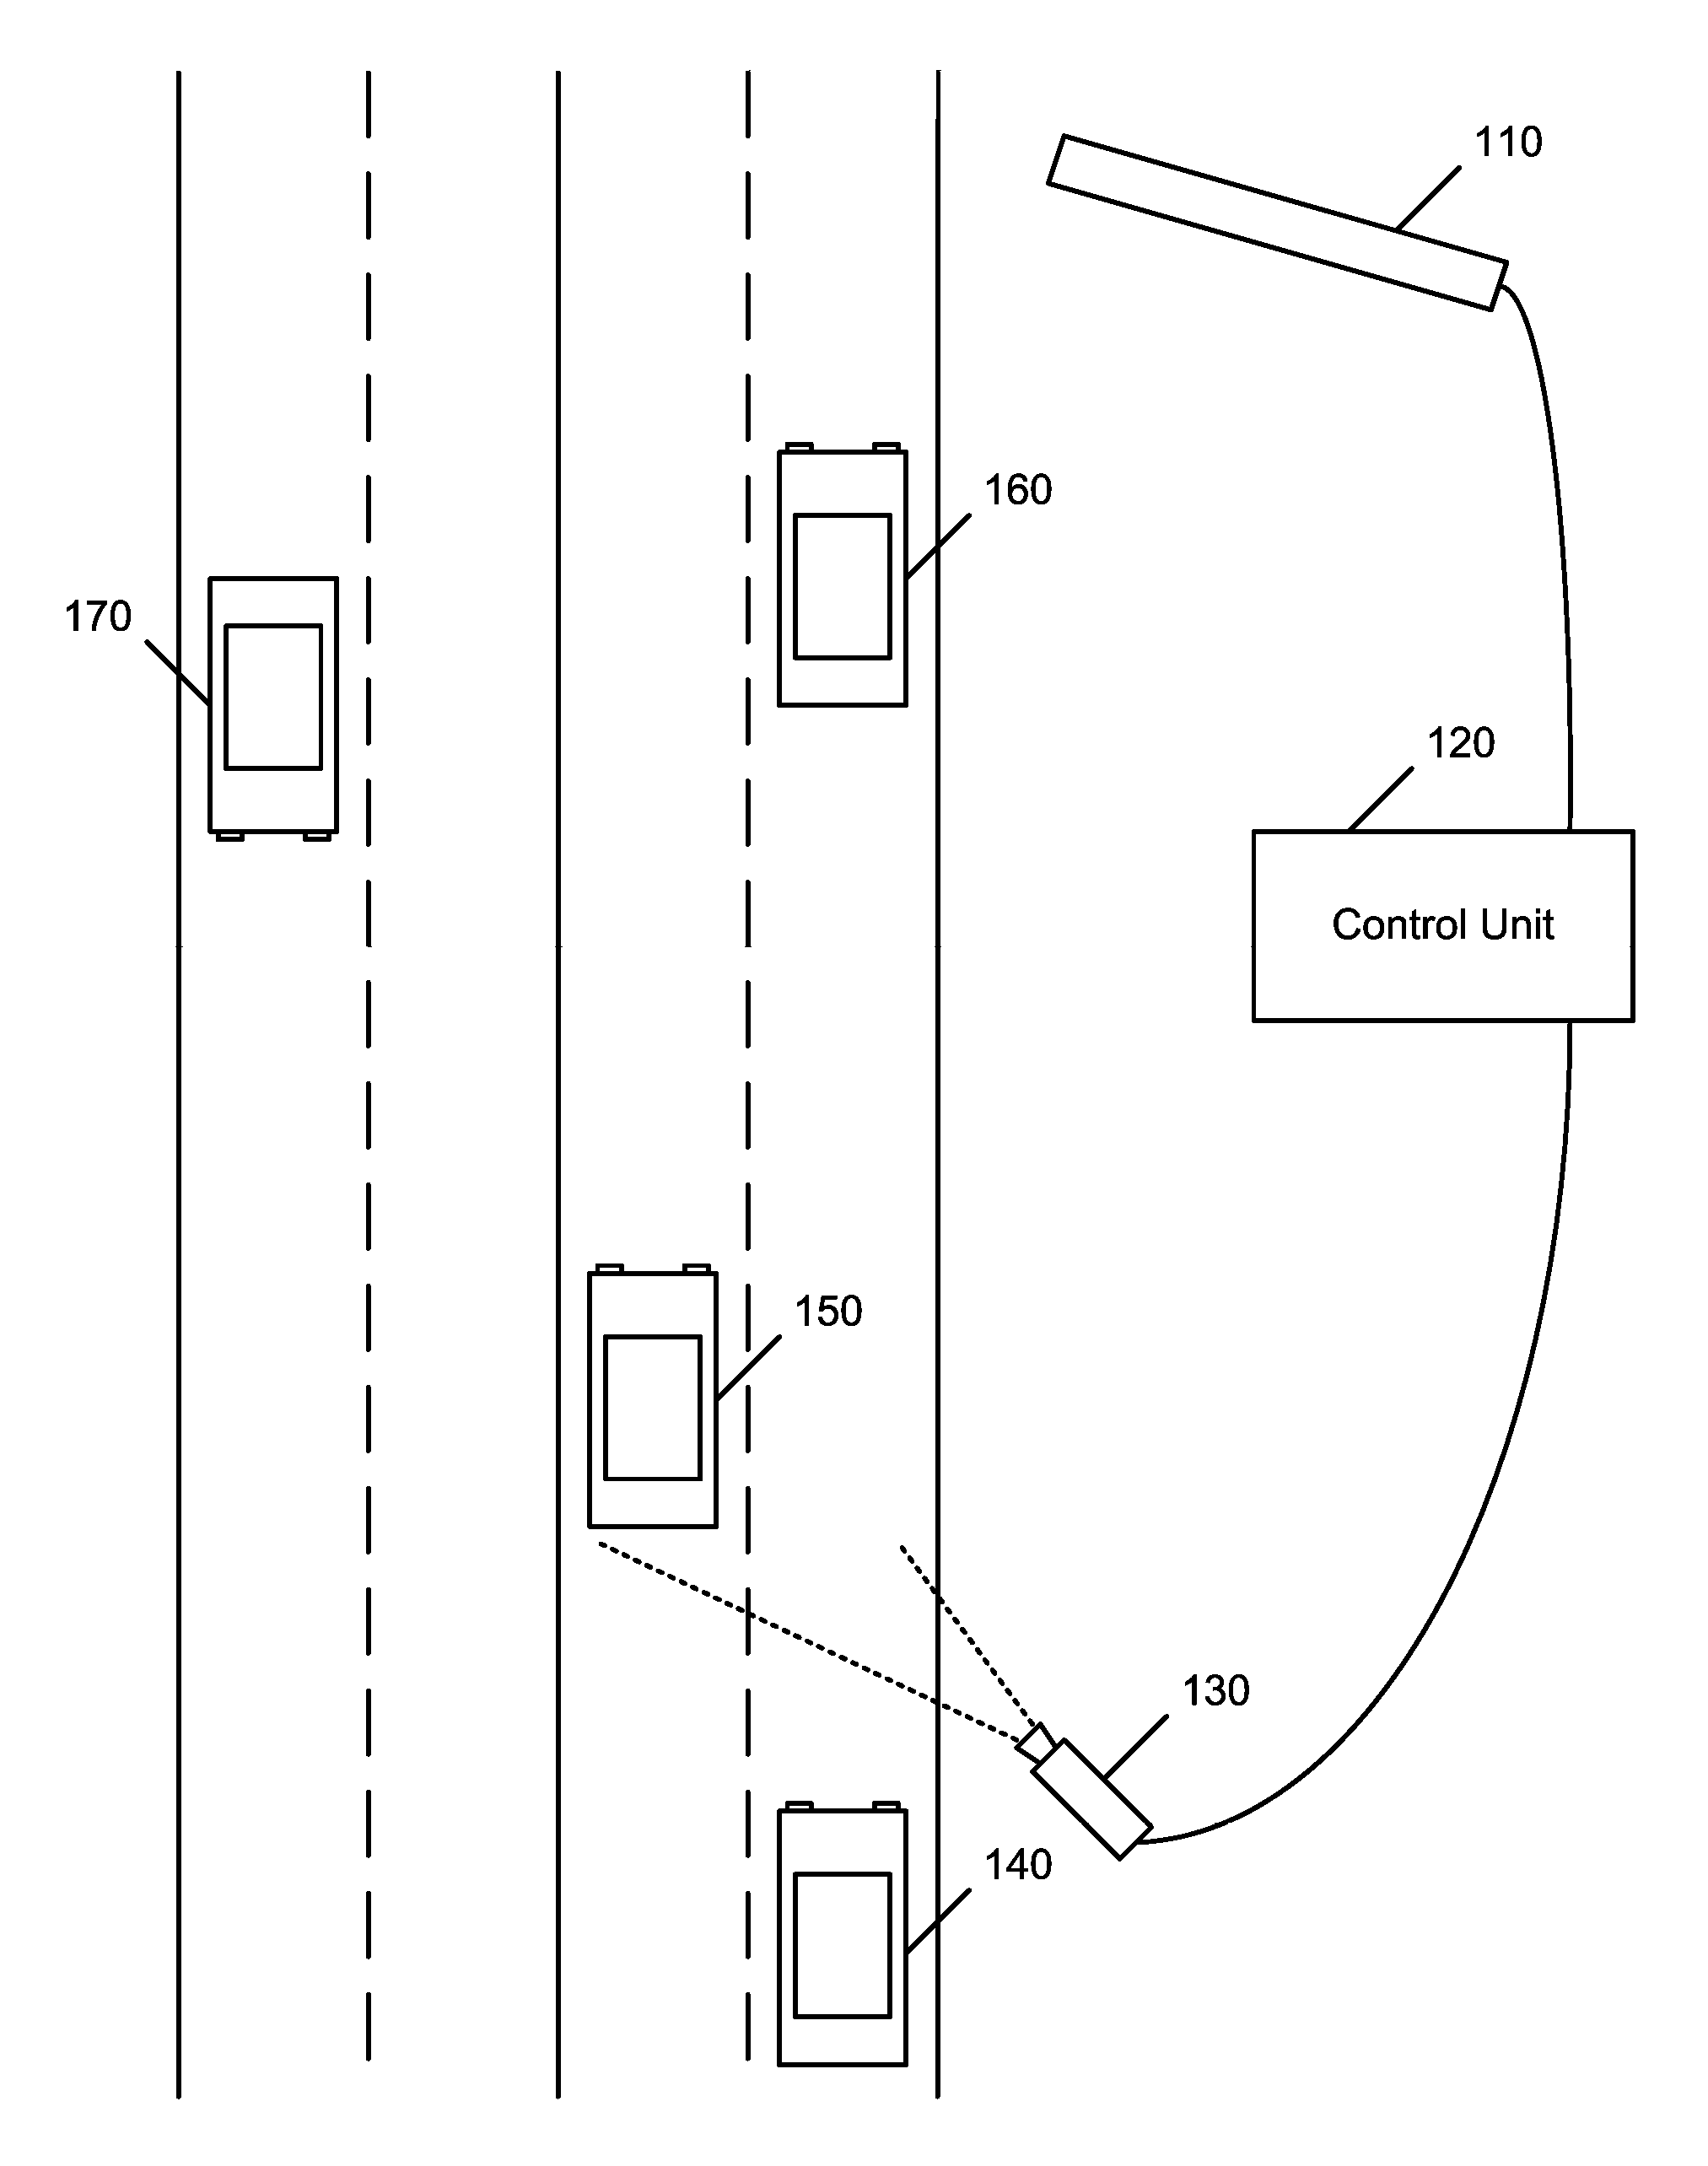 Profile-based messaging apparatus and method